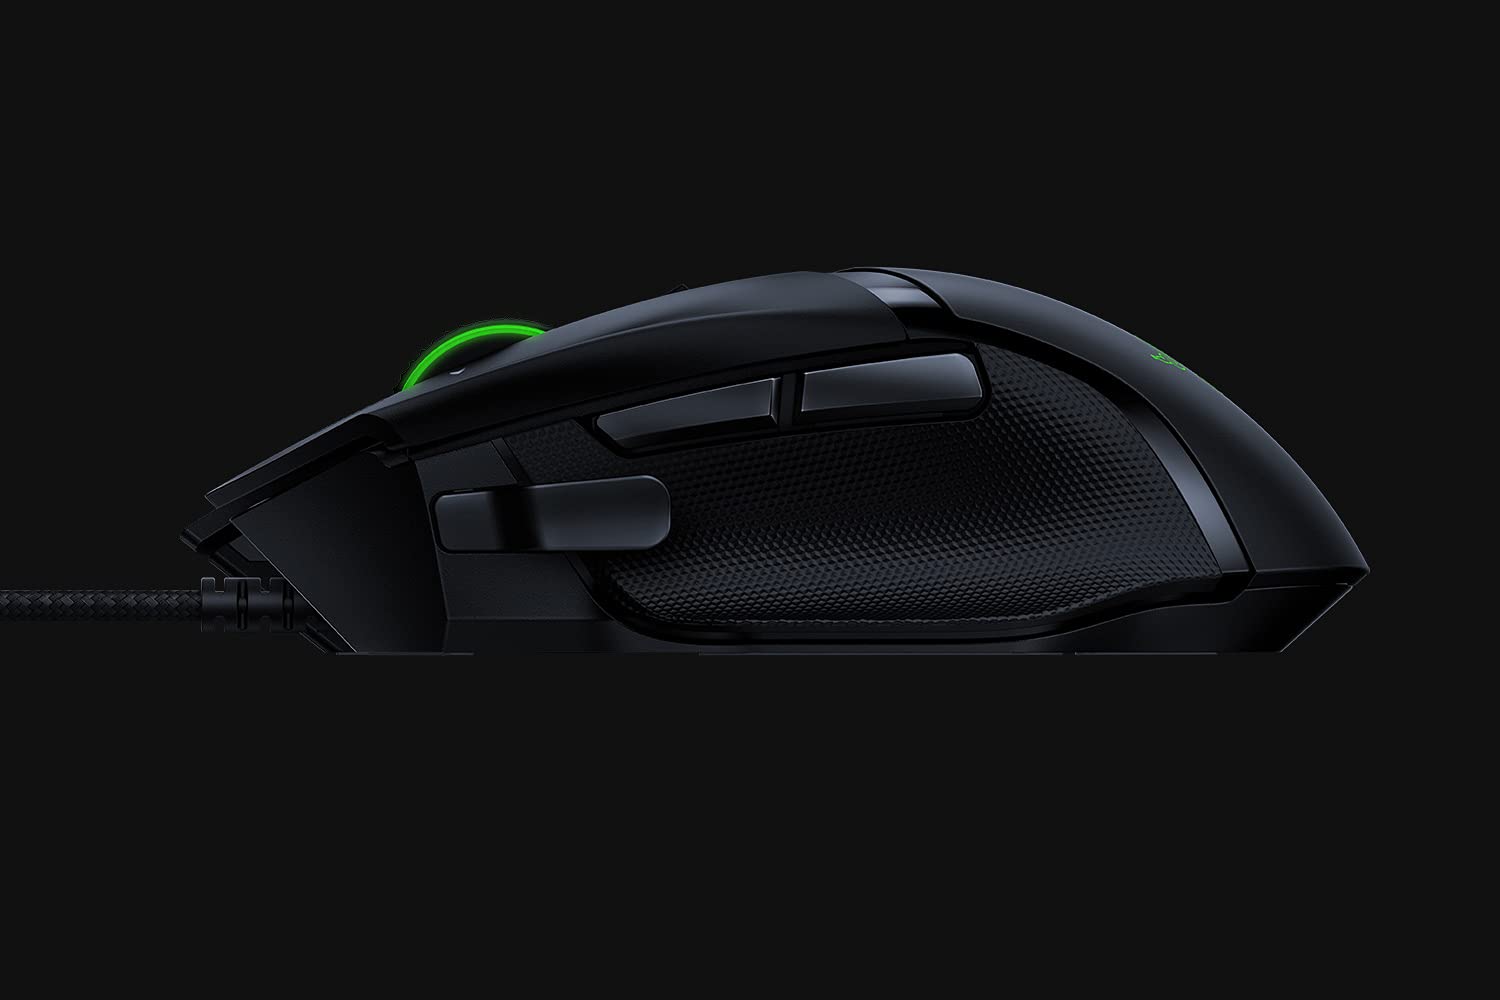 Razer Basilisk V2 - FPS Gaming Mouse (Gaming Mouse with New 20,000 DPI Focus + Optical Sensor, 5G, Removable Dpi Switch and Customizable Scroll Wheel, RGB Chroma and USB) Black